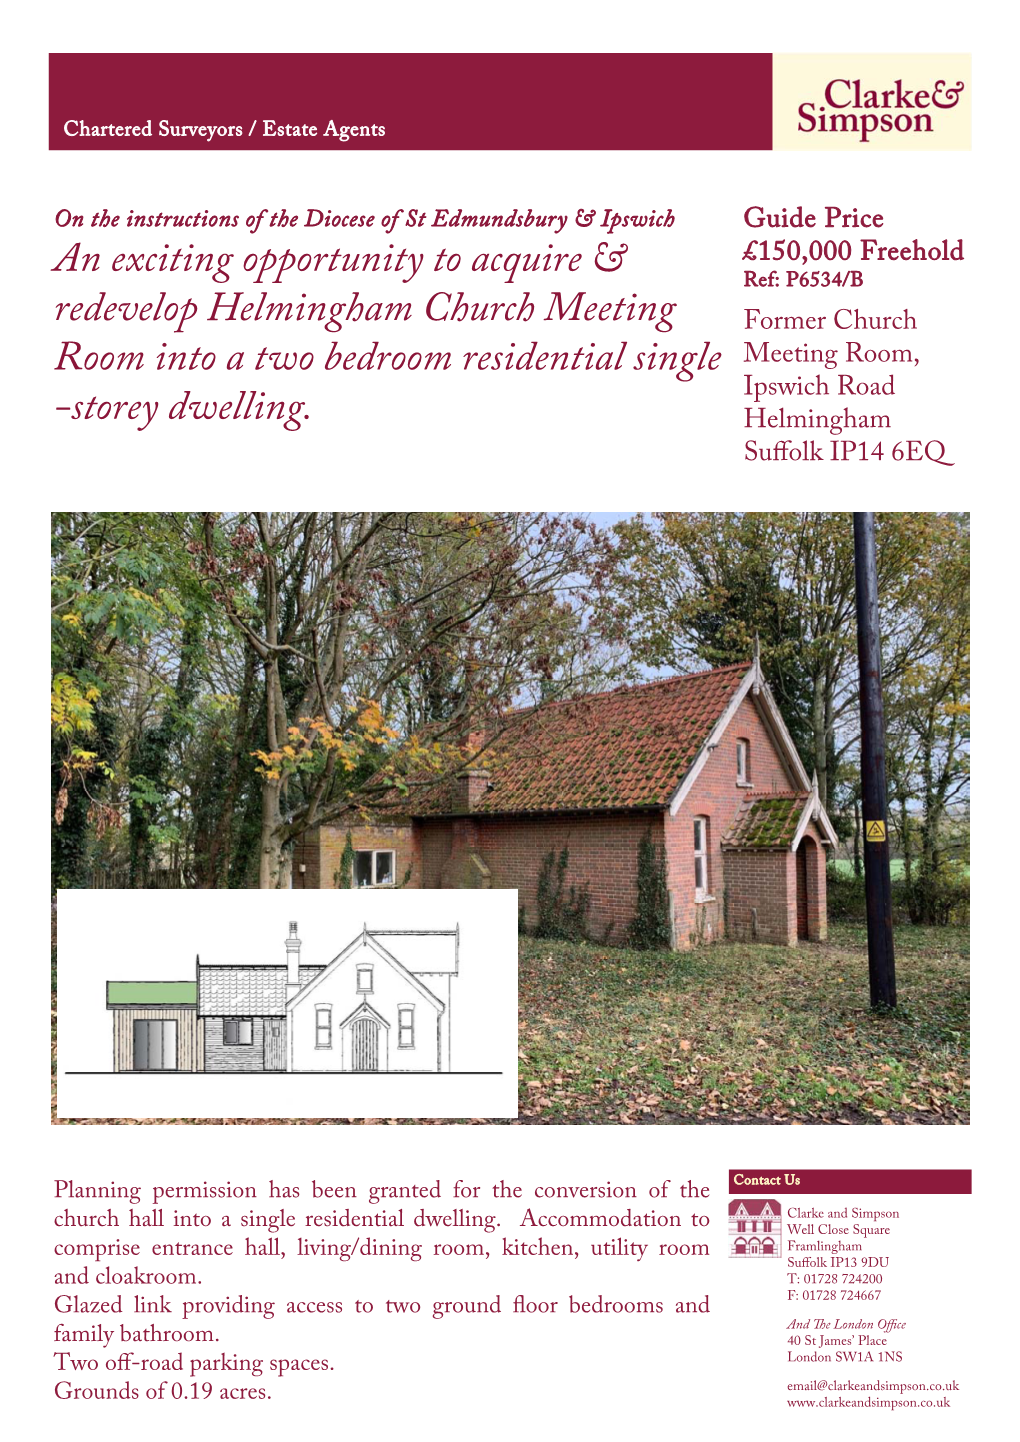 An Exciting Opportunity to Acquire & Redevelop Helmingham Church